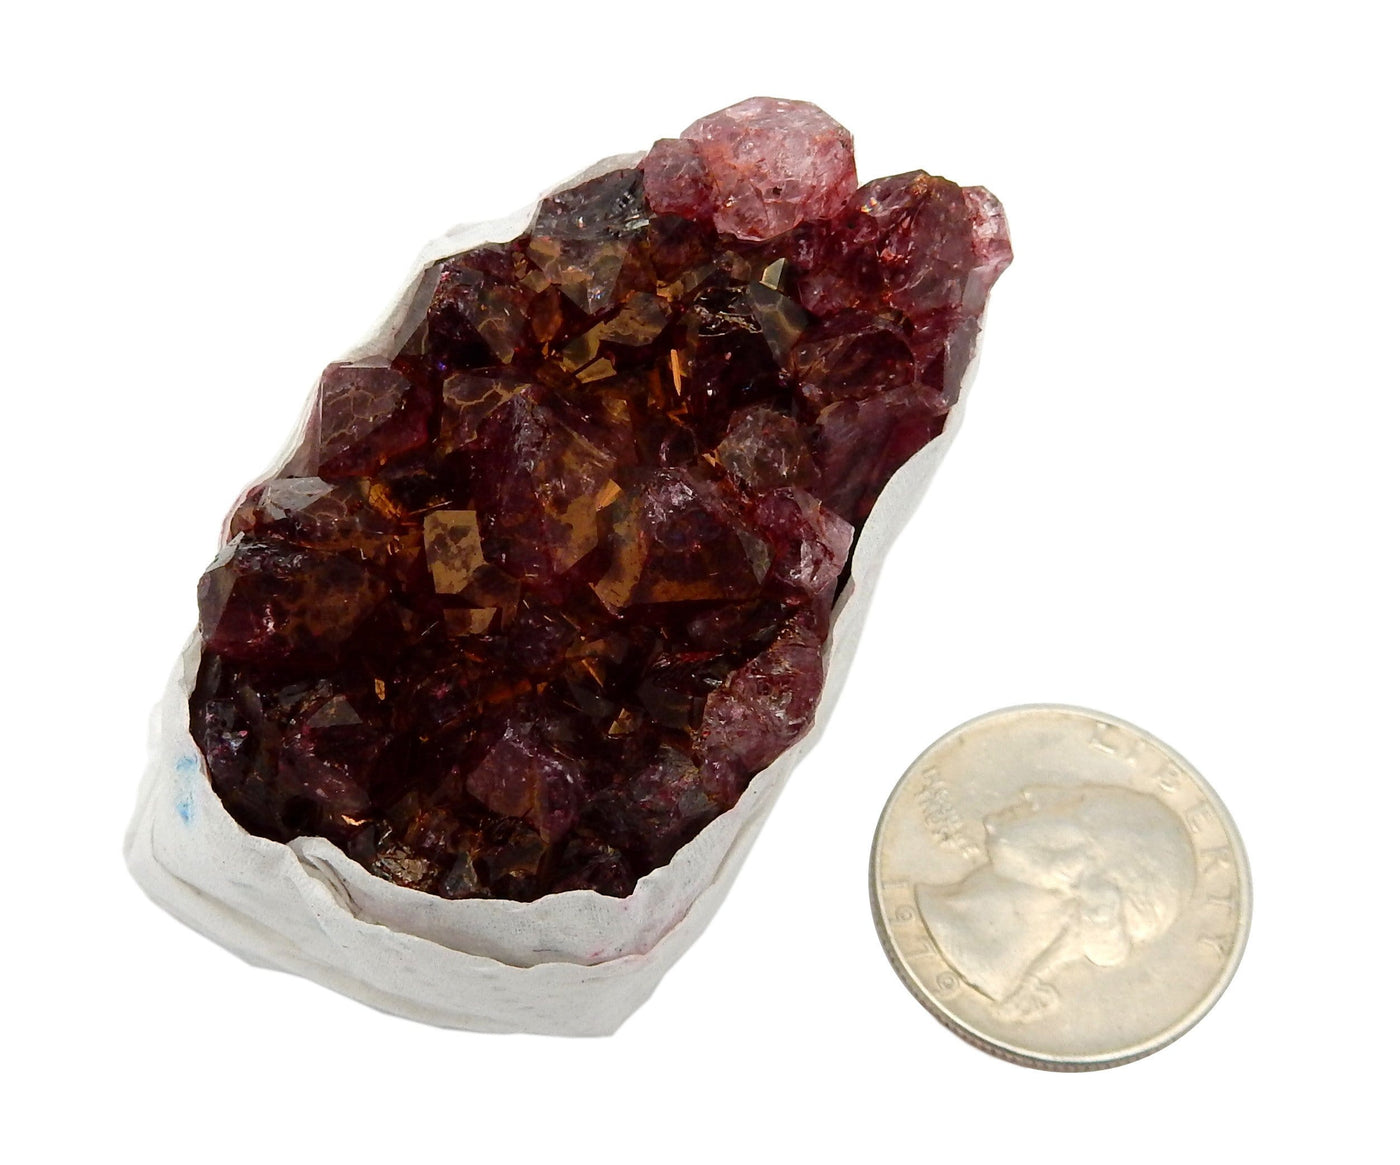 One dyed red amethyst druzy on a white background compared with a quarter. It is twice the size of the quarter.